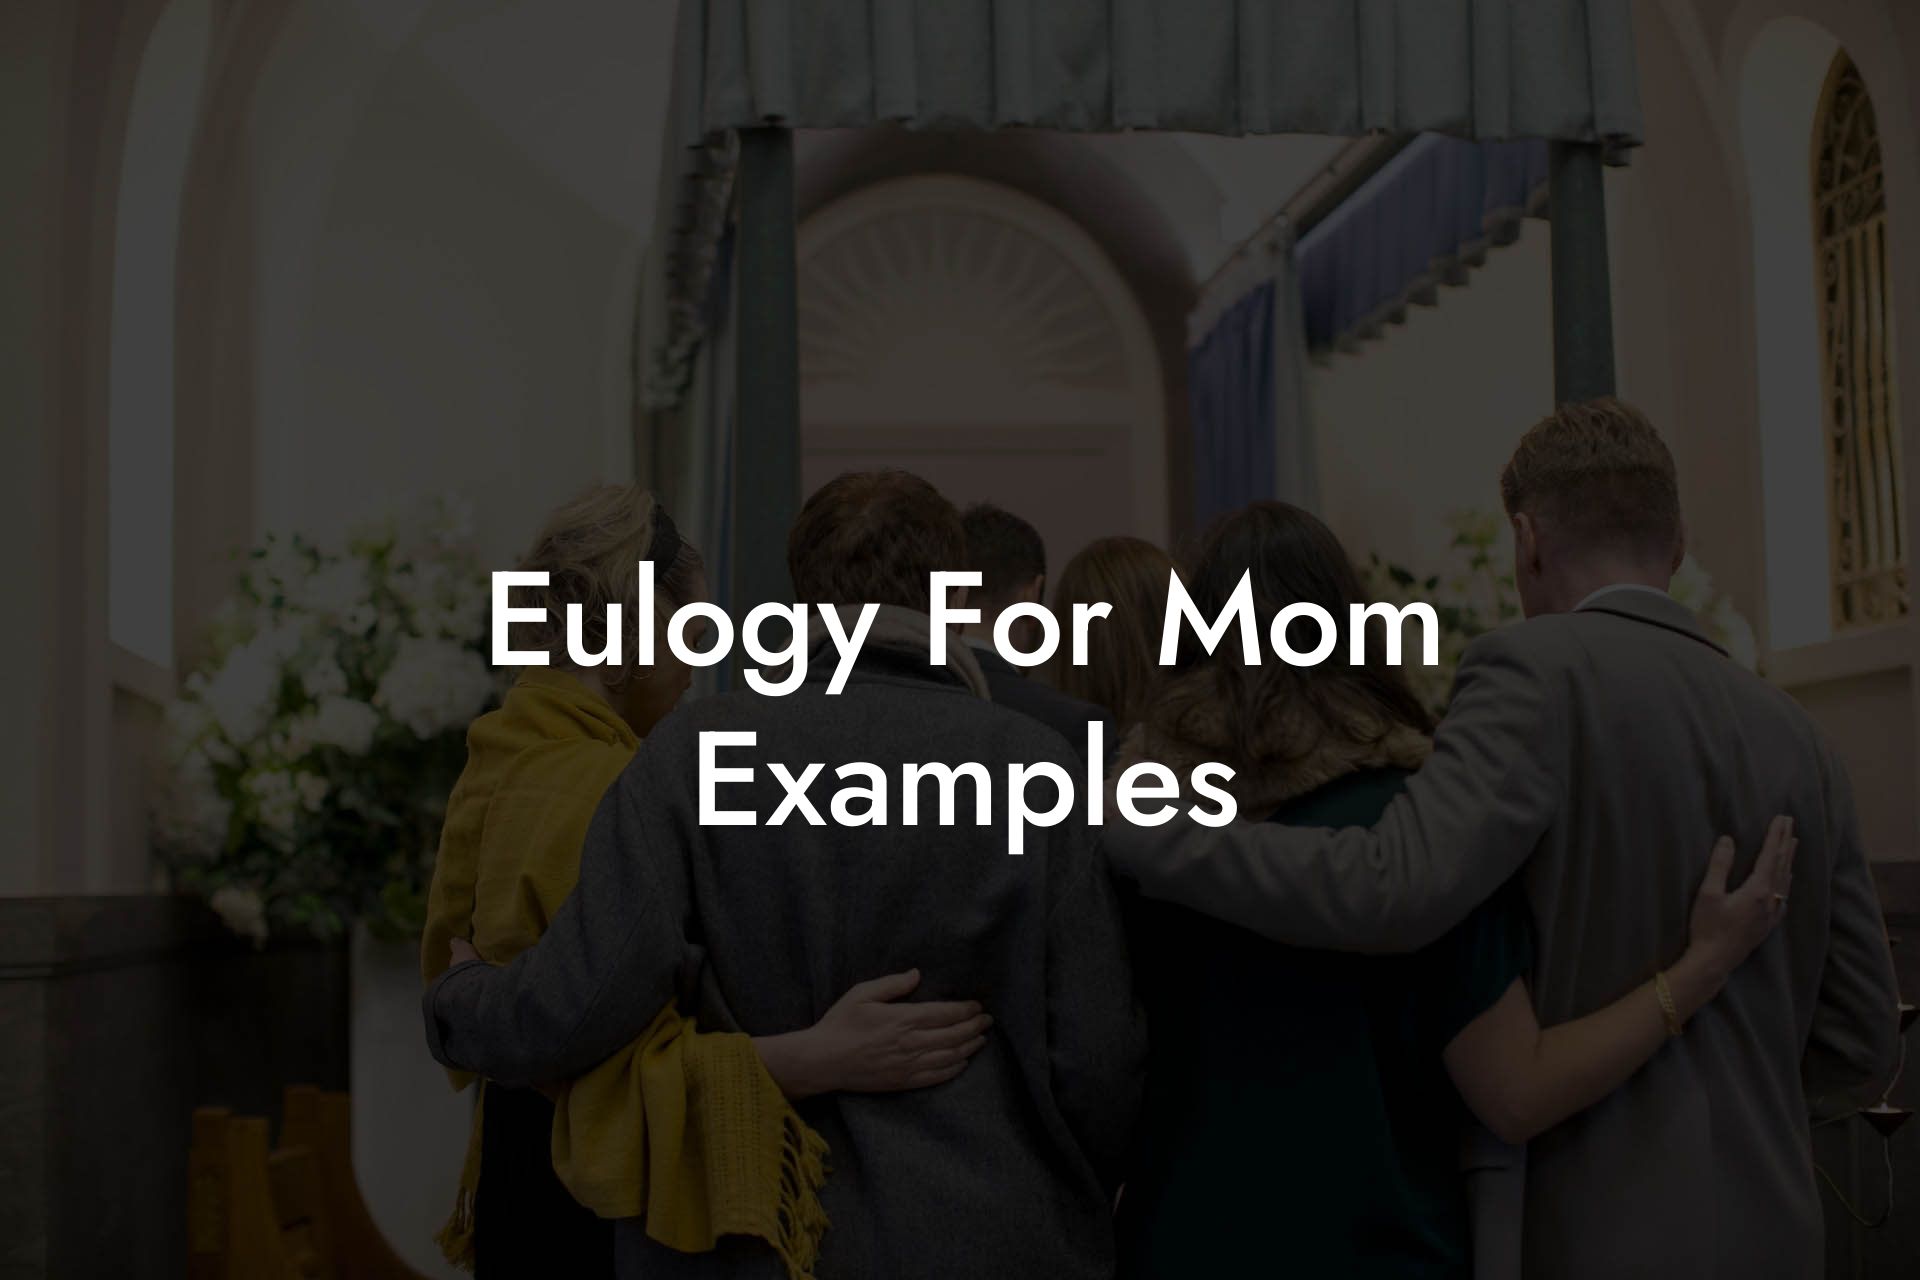 Eulogy For Mom Examples